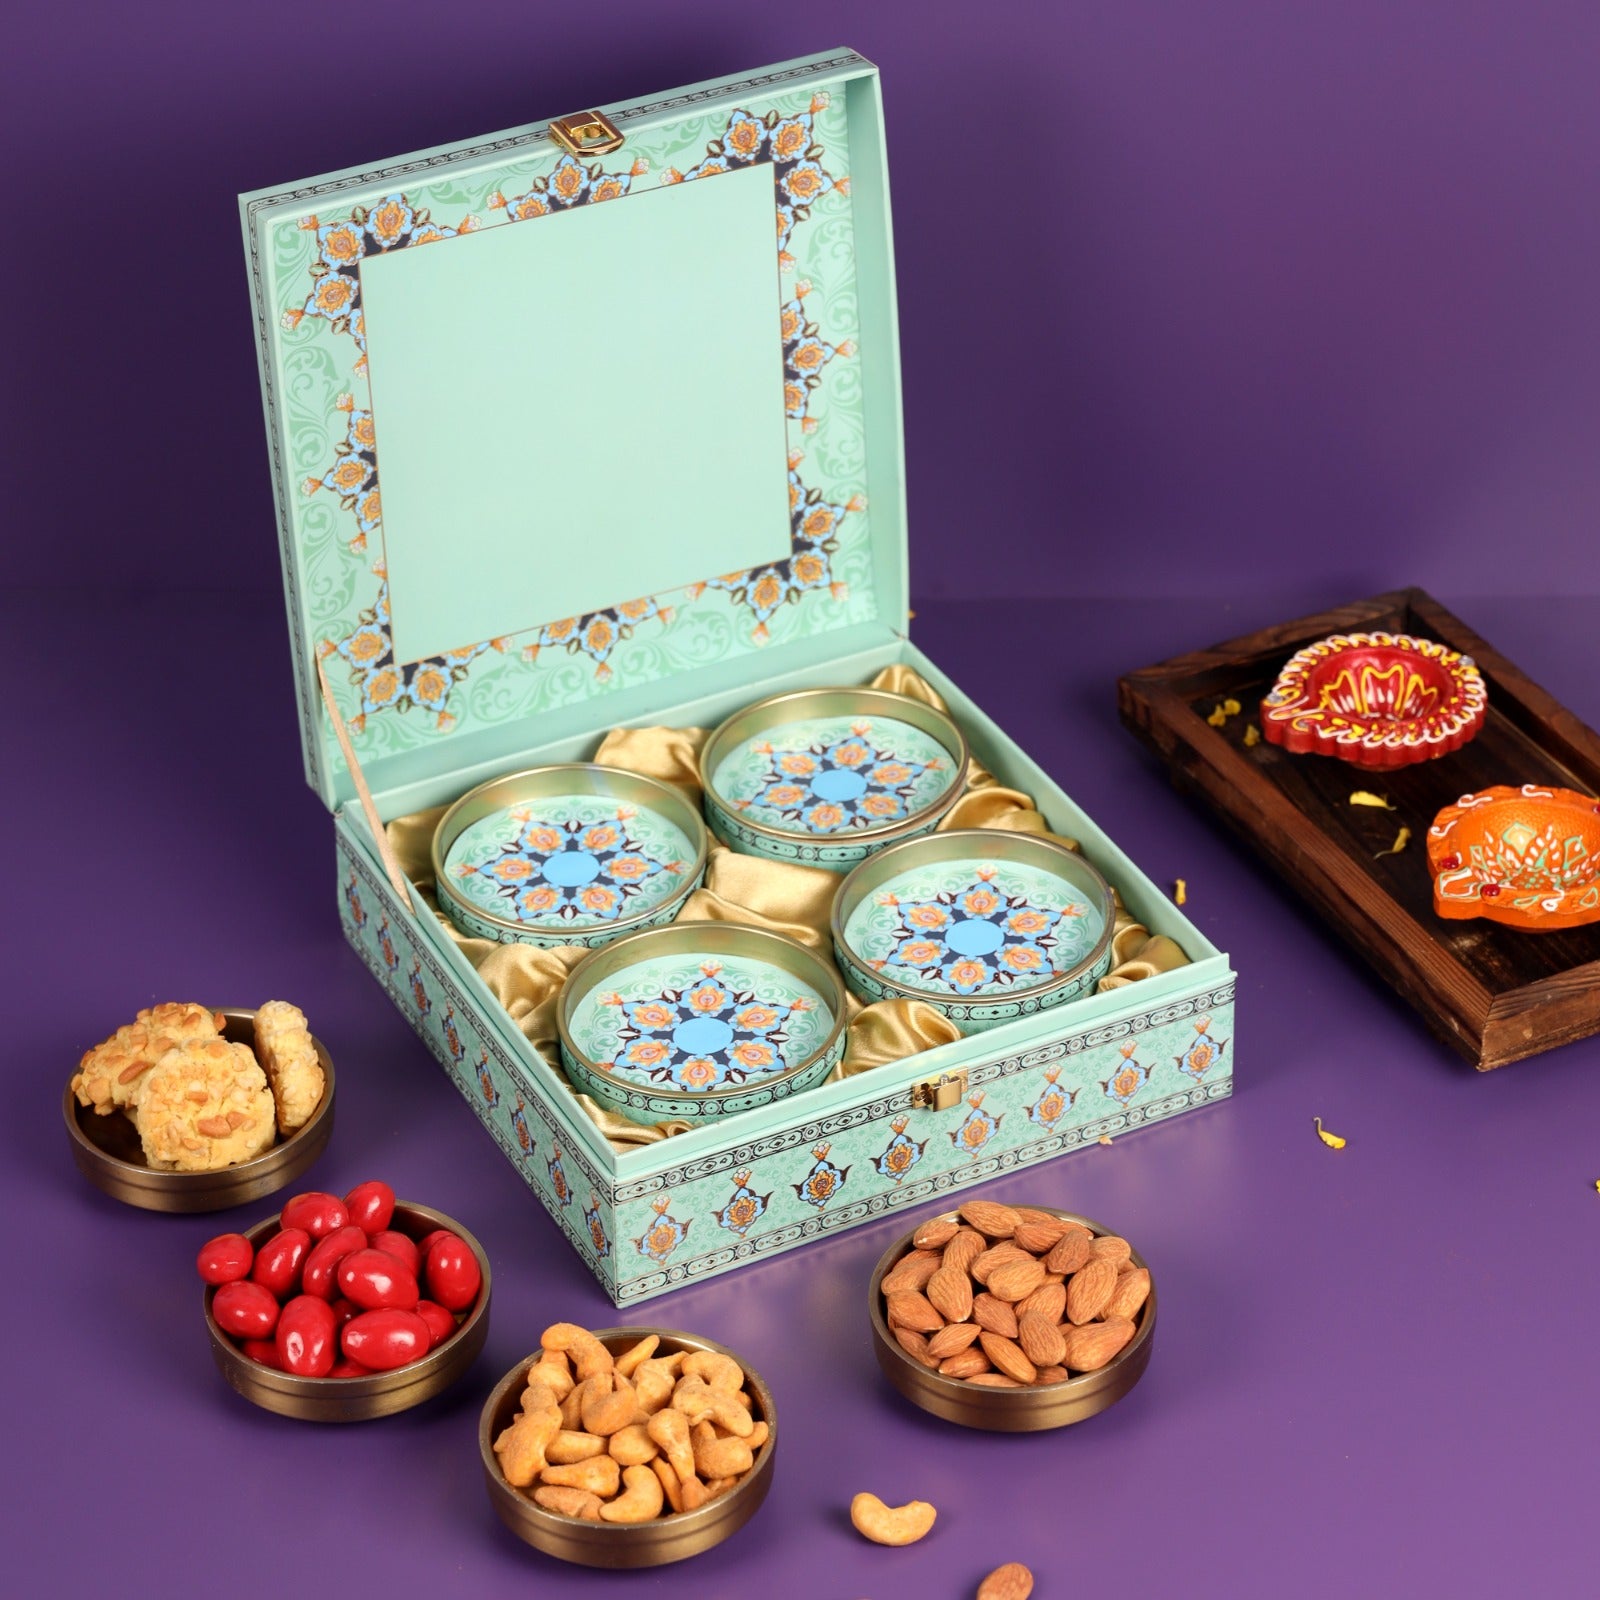 Premium Gourmet Gift Box - 4 Delicious Jars of American Salted Almonds, Masala Kaju, Butter Cashew Cookies, and Almond Dragees